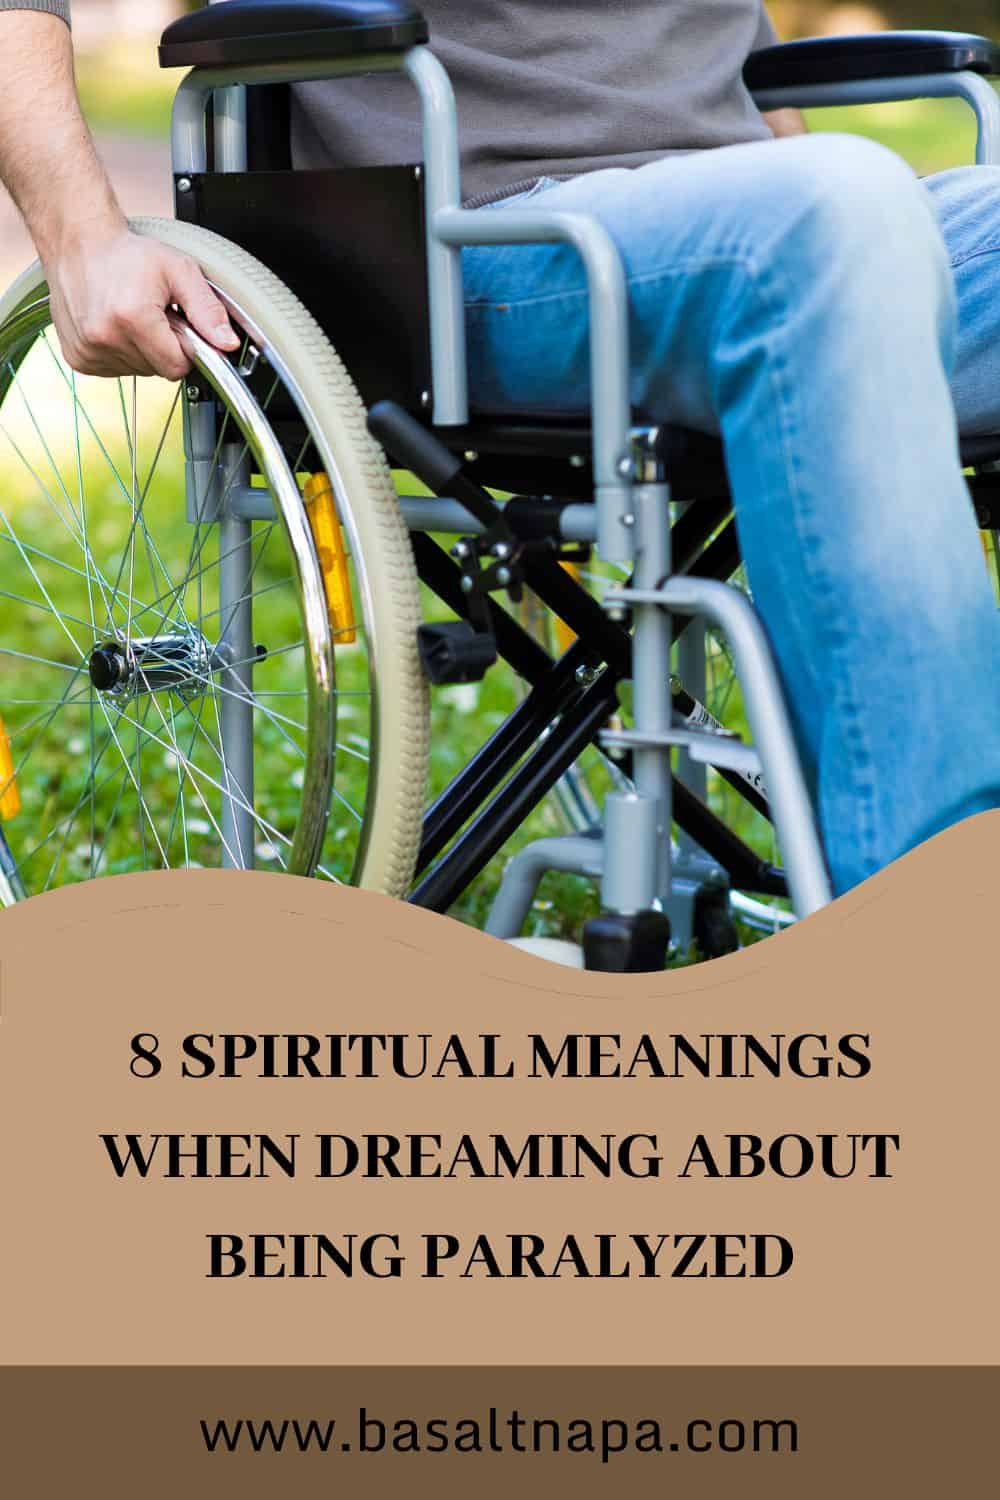 8 Meanings to Dreaming You’re Being Paralyzed